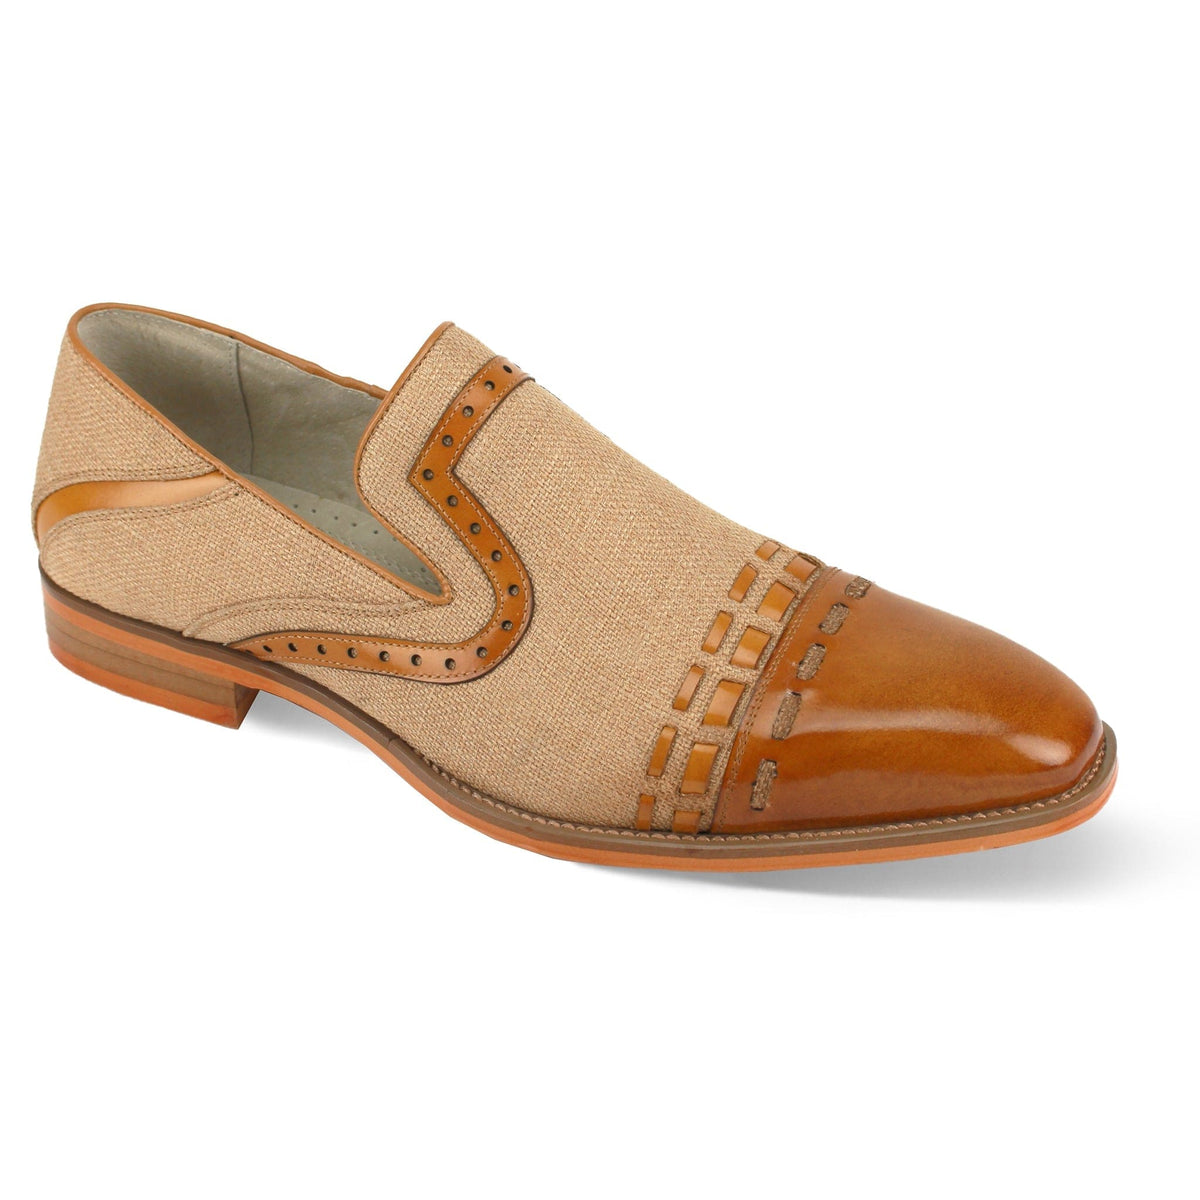 GIOVANNI LEATHER SHOES FT TAN / 7 GIOVANNI LEATHER SHOES-PARKER